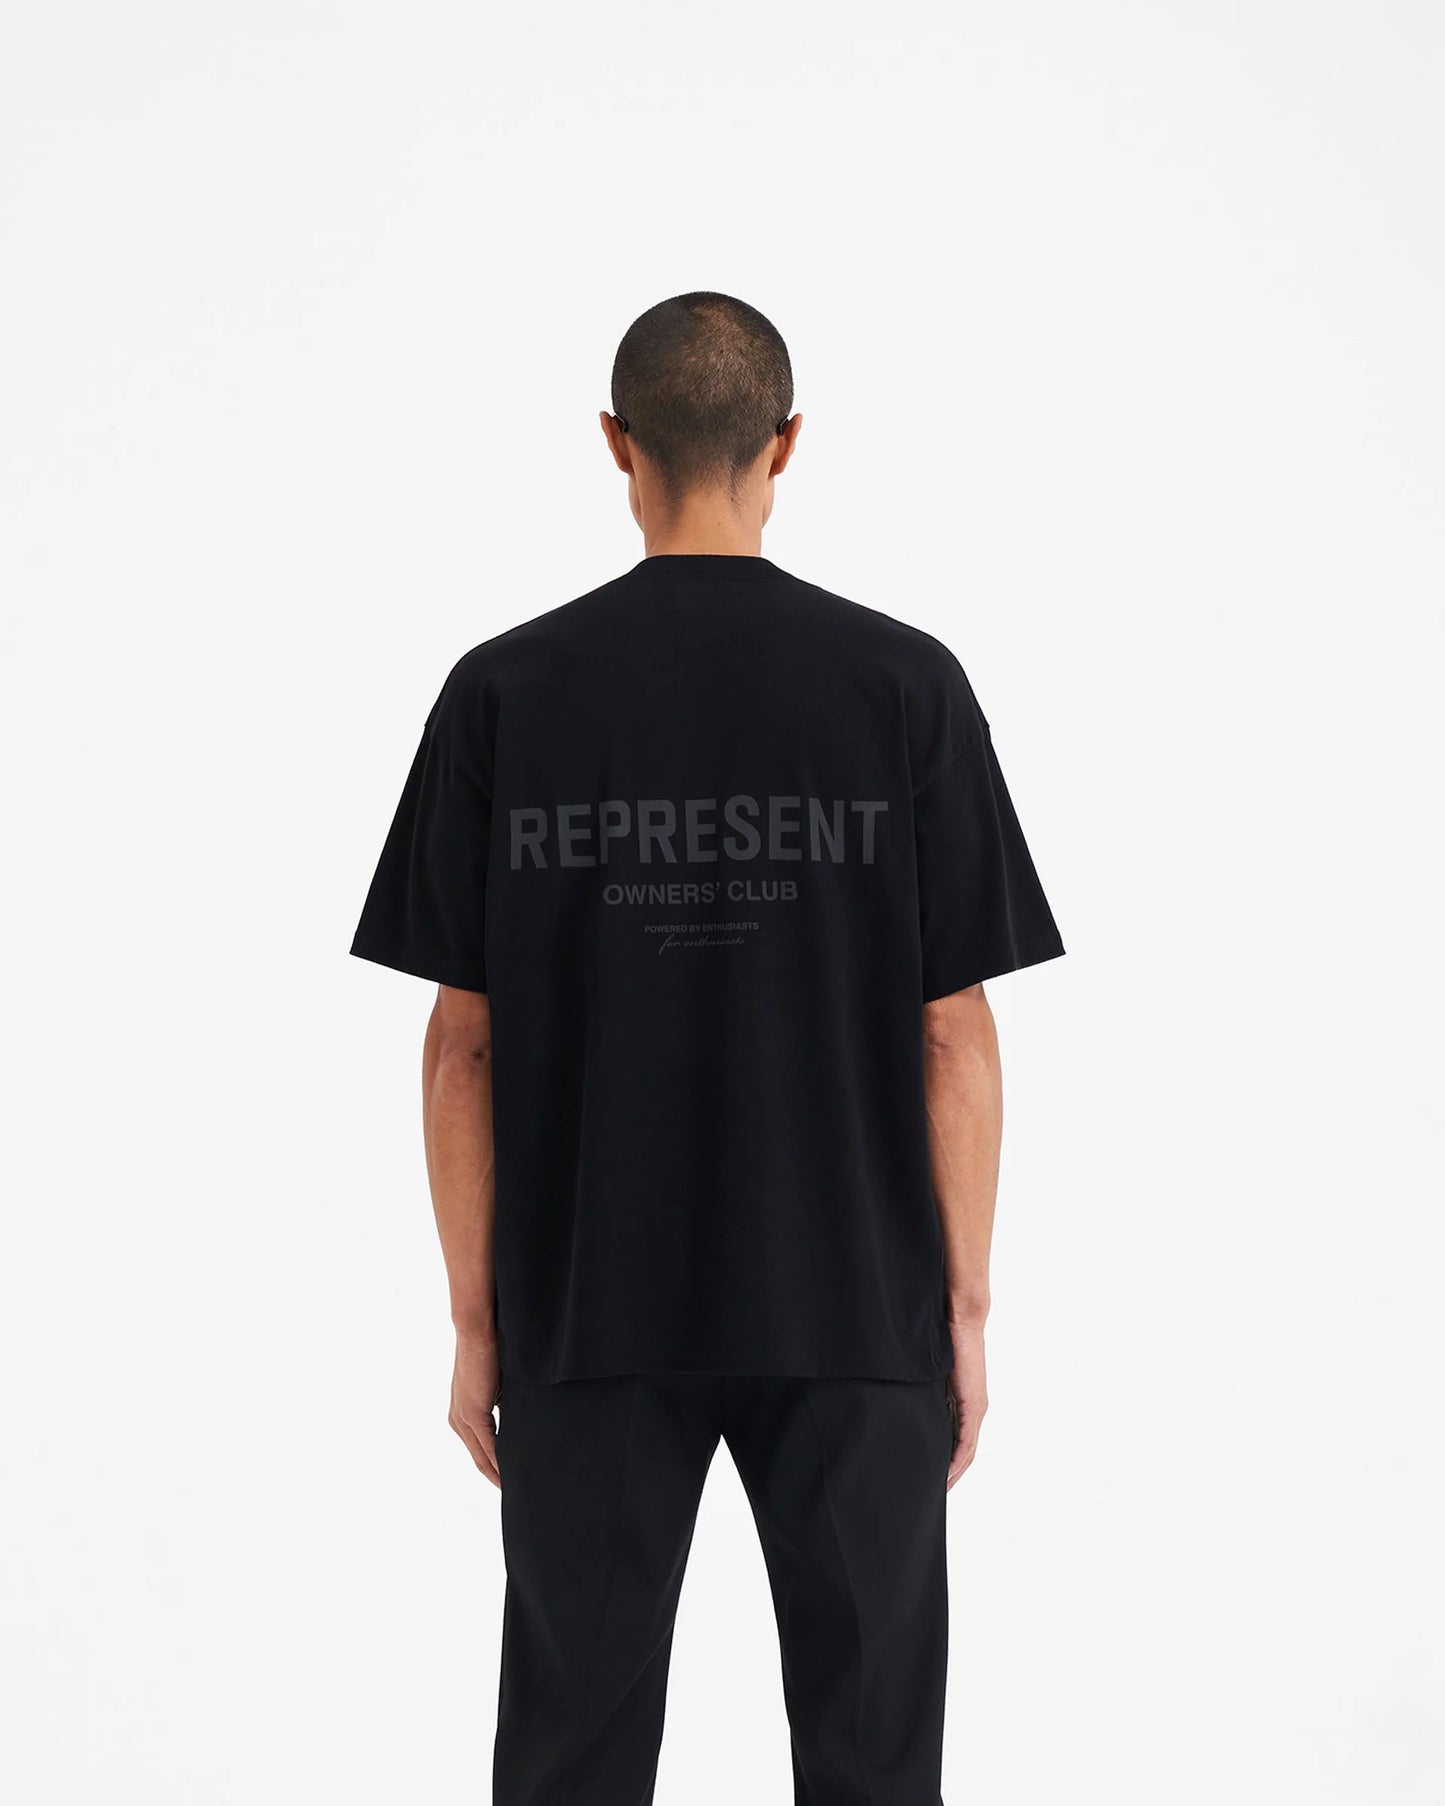 T-shirt Owners Club Black Reflective